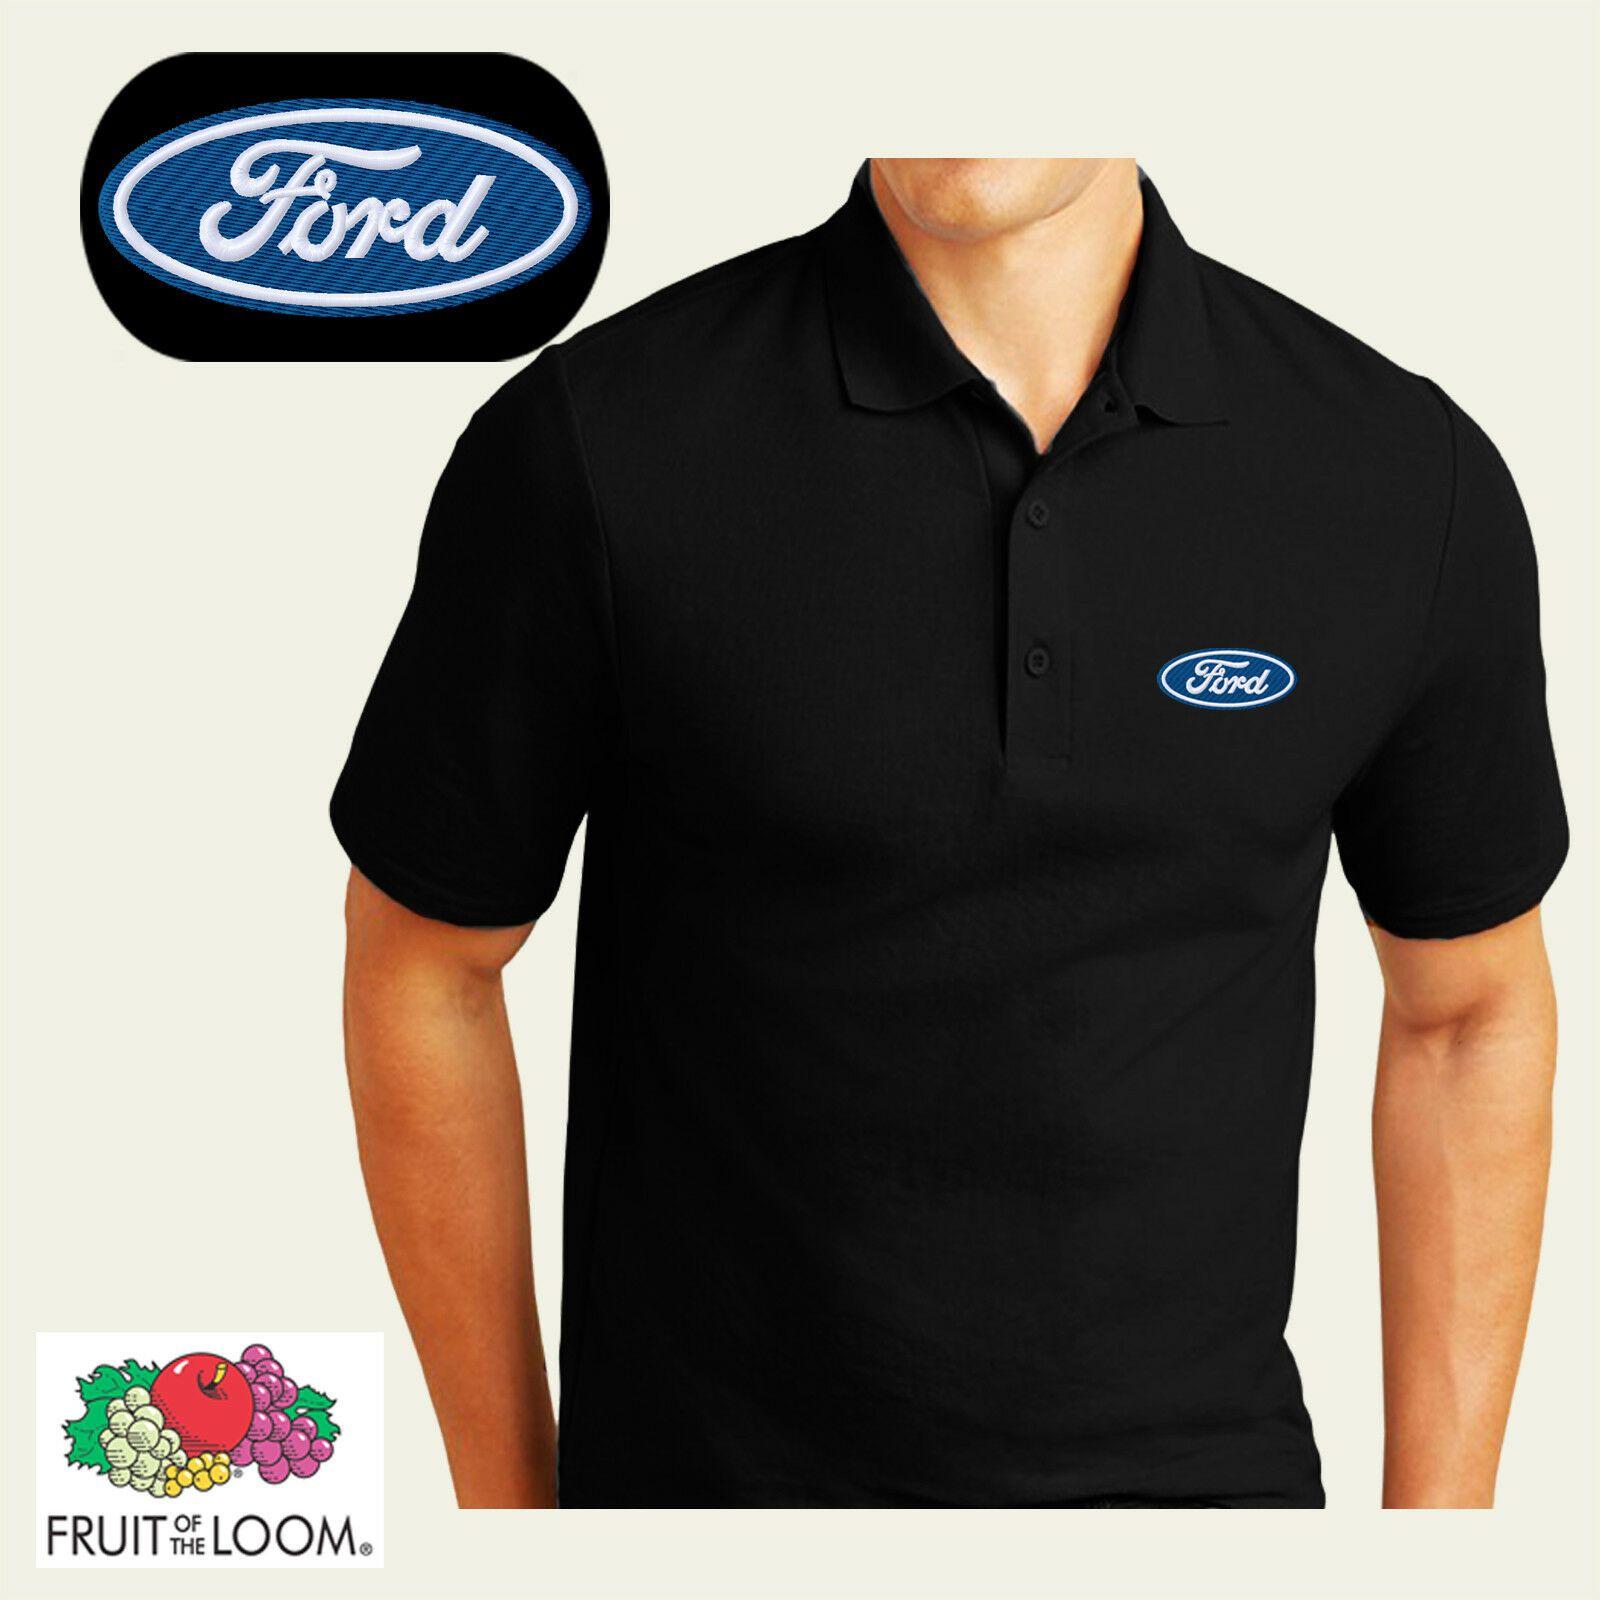 Polo Shirts with Logo - FRUIT OF THE LOOM POLO SHIRT EMBROIDERED FORD LOGO Birthday Gift